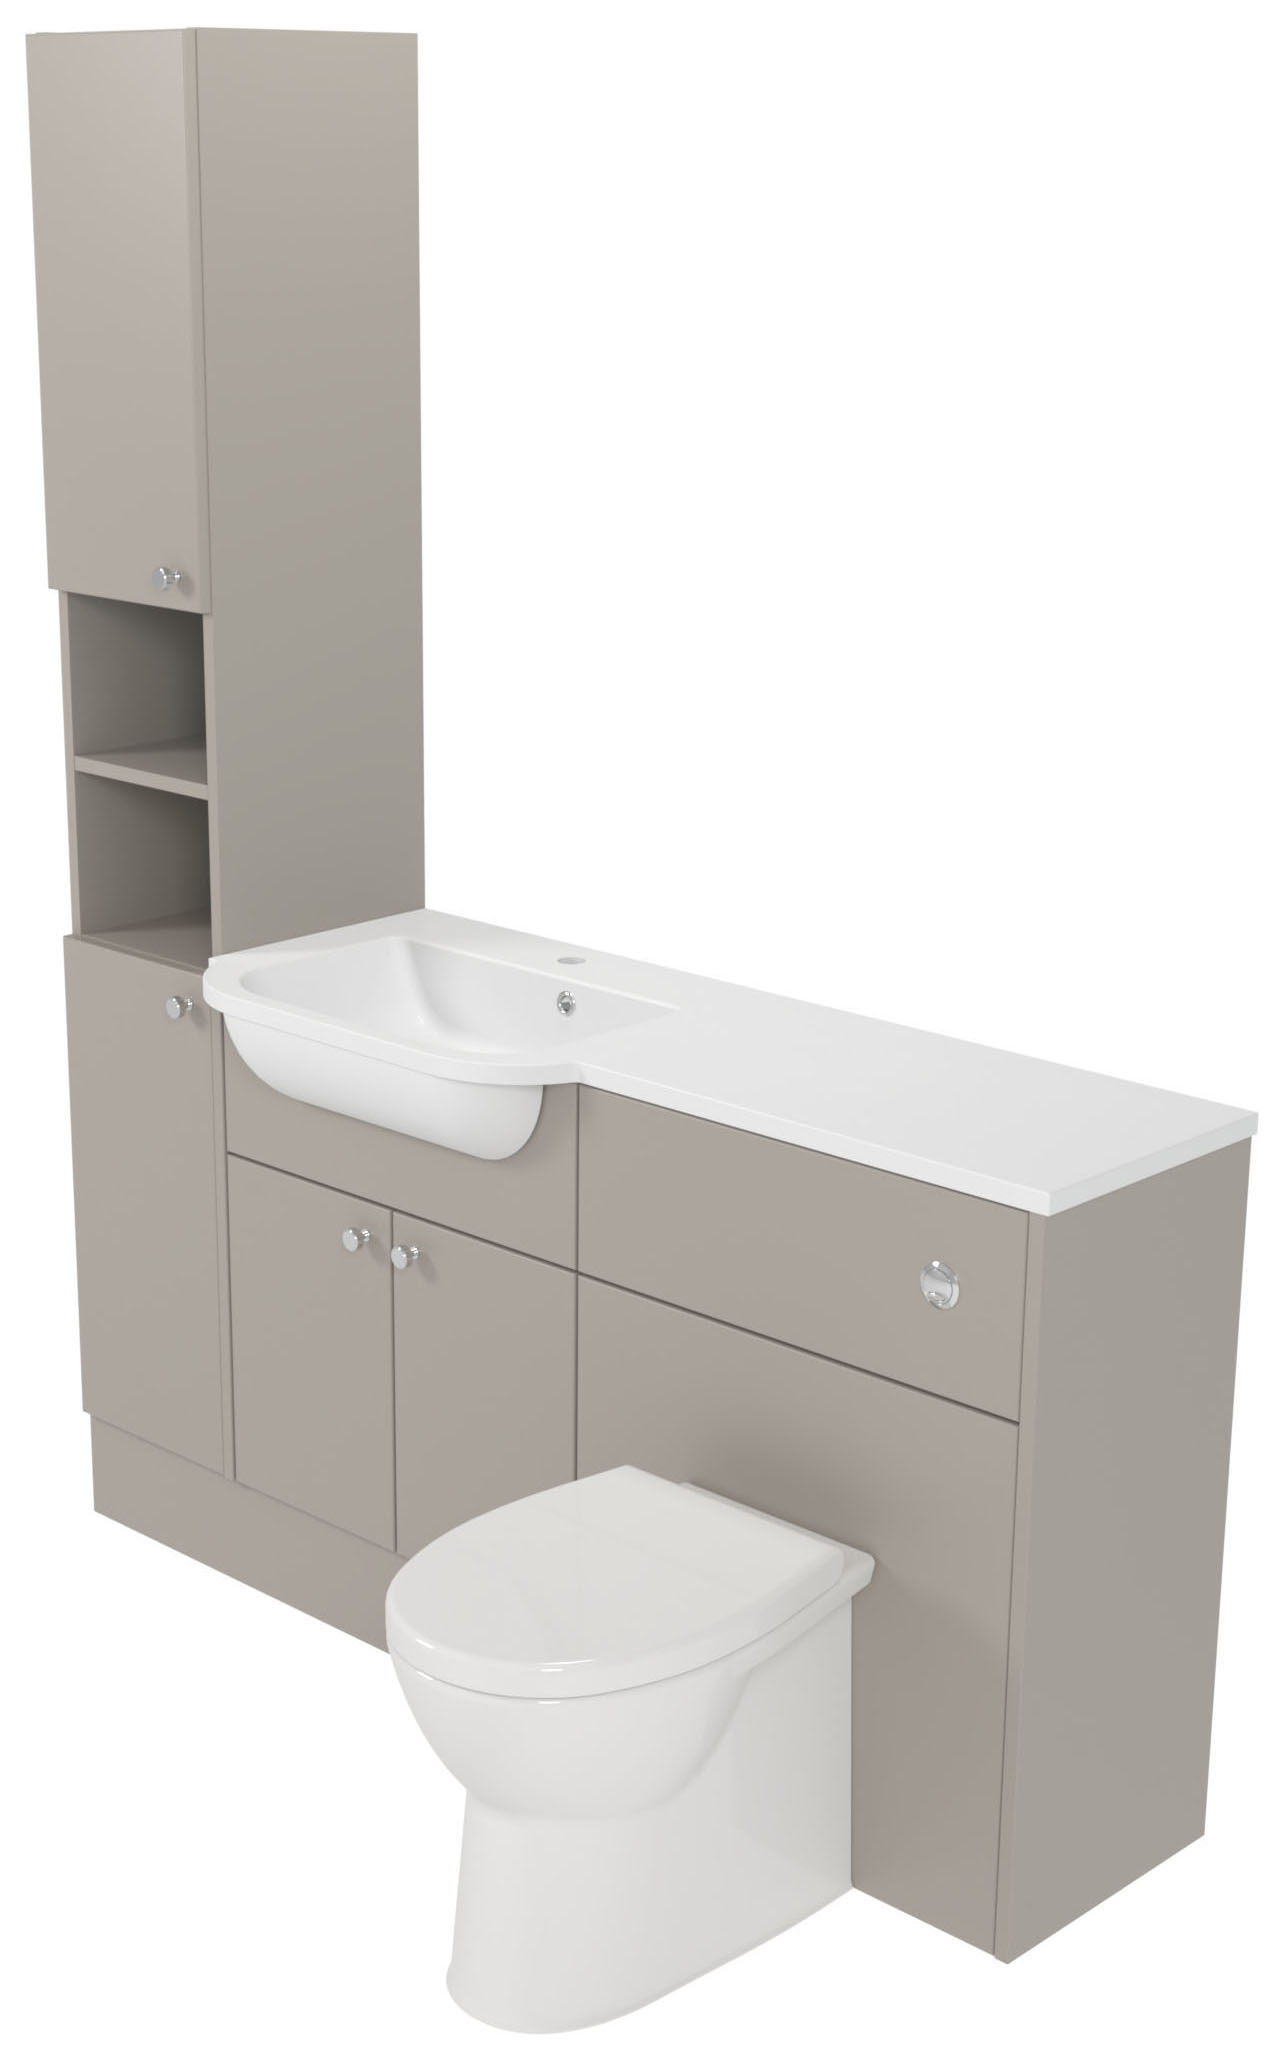 Deccado Benham Soft Suede 1500mm Fitted Tower, Vanity & Toilet Pan Unit Combination with Basin